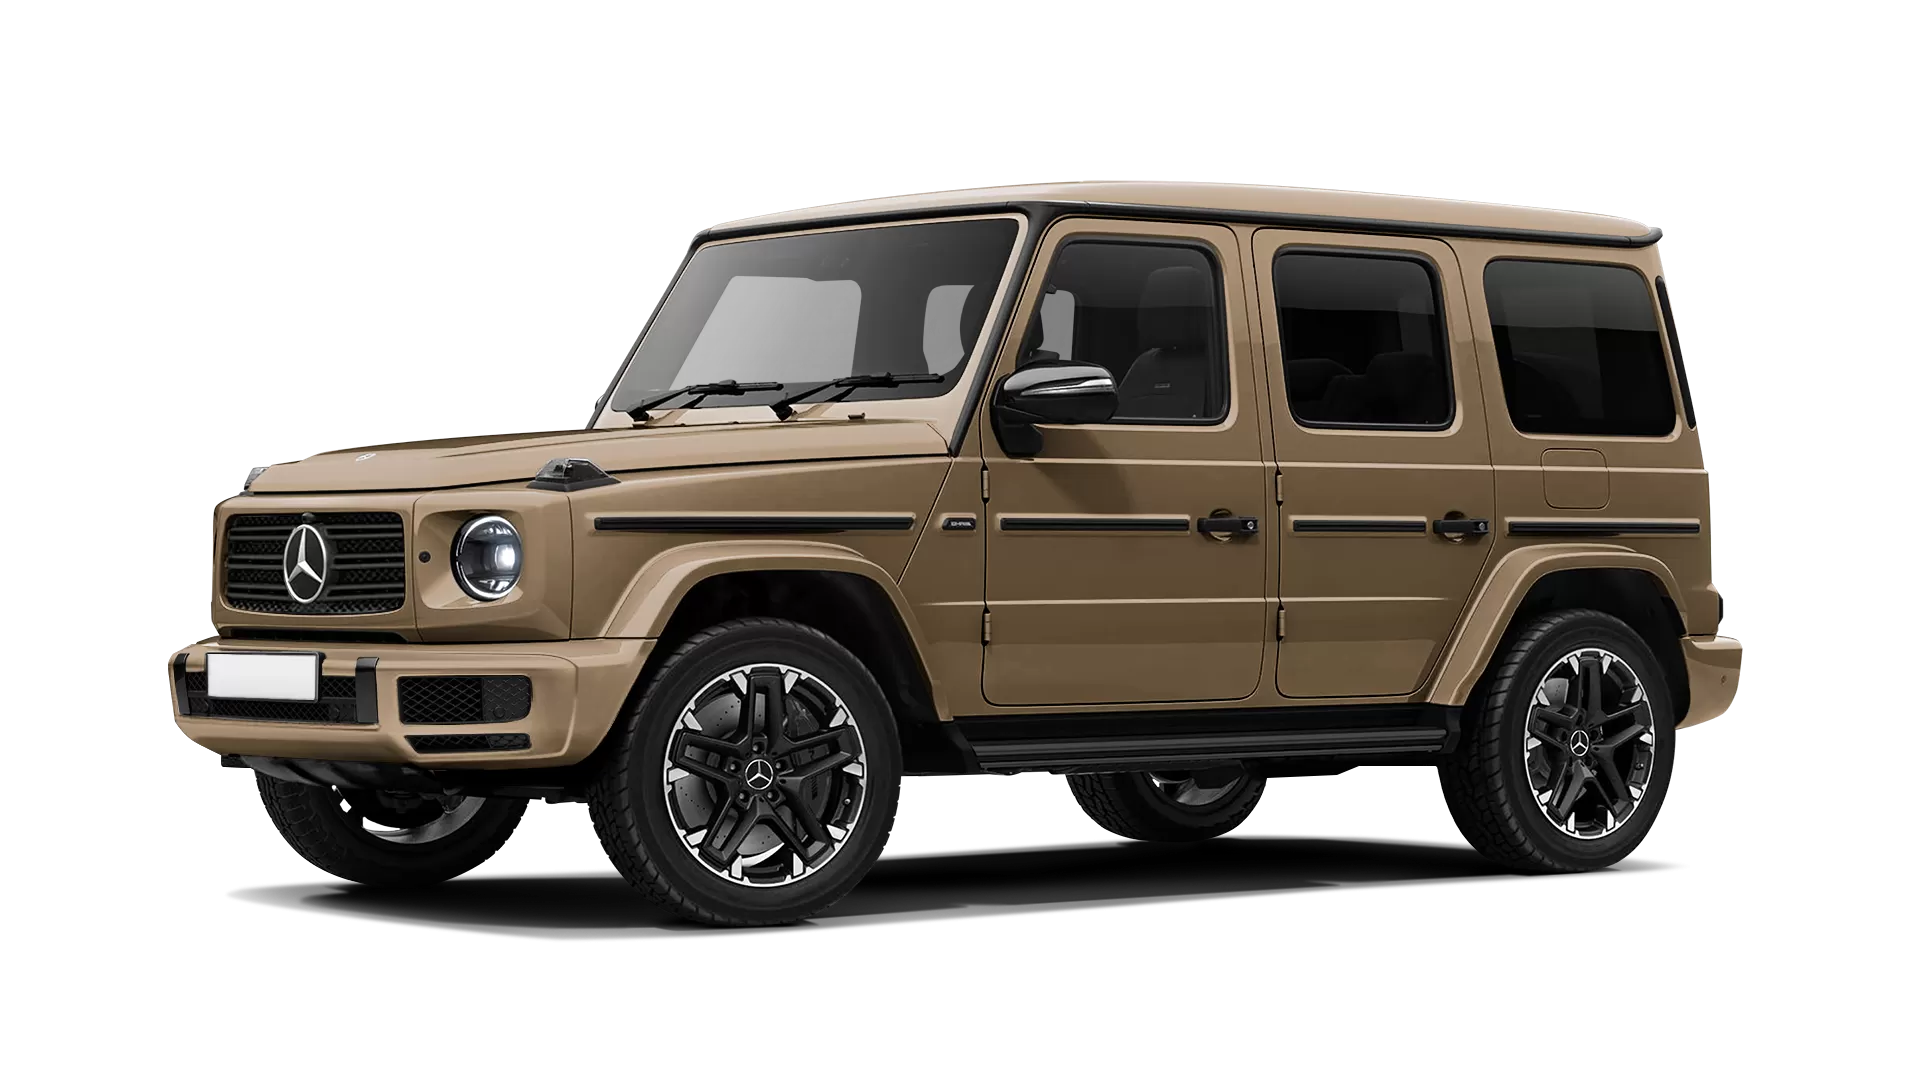 Mercedes G class W463 stock front view in Desert Sand color